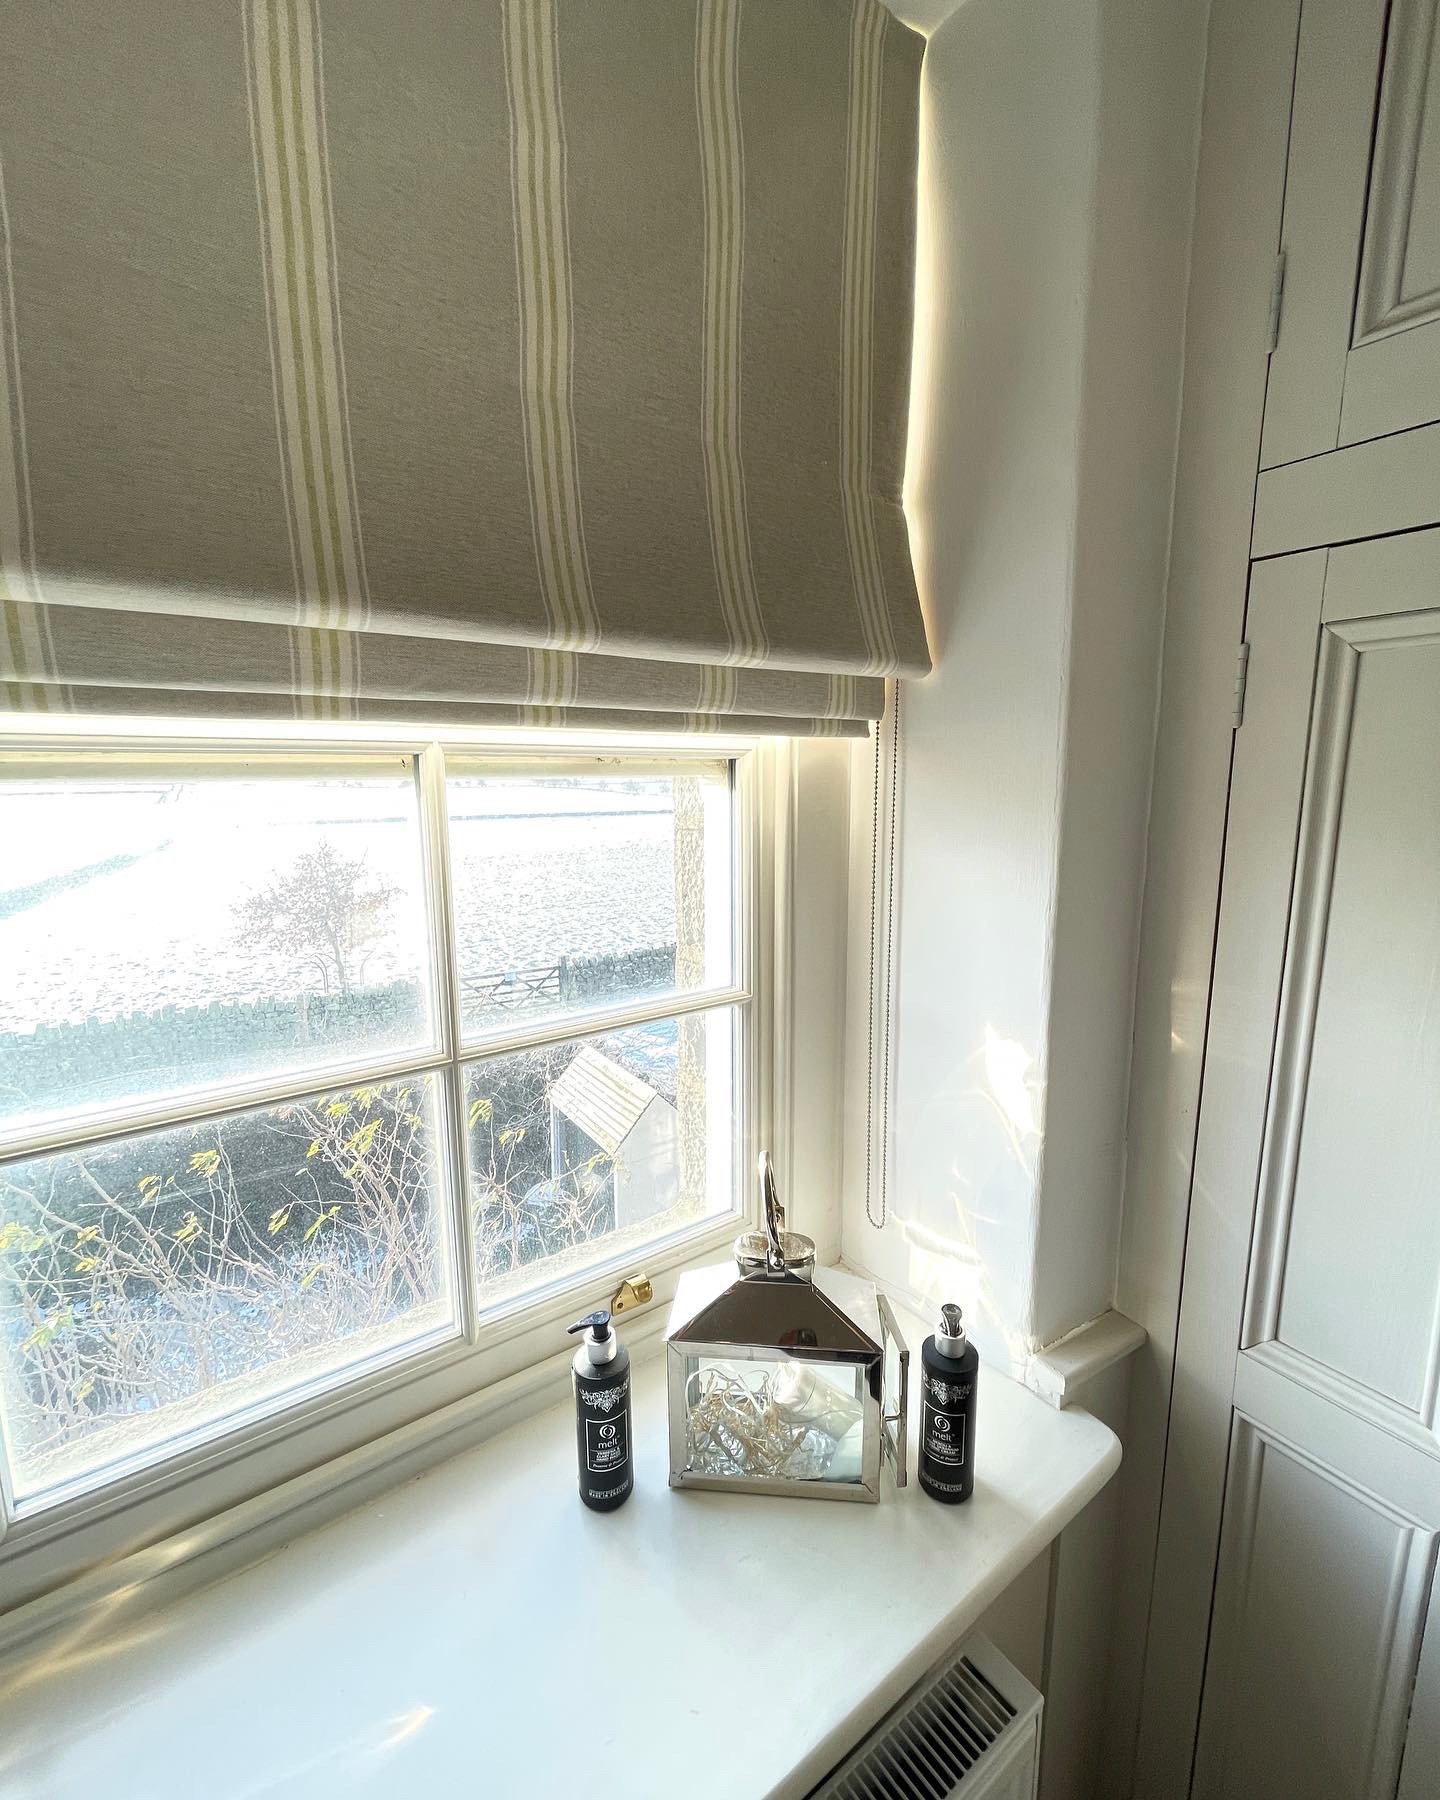   Specialist Blinds   THE PERFECT CHOICE FOR YOUR WINDOWS! 